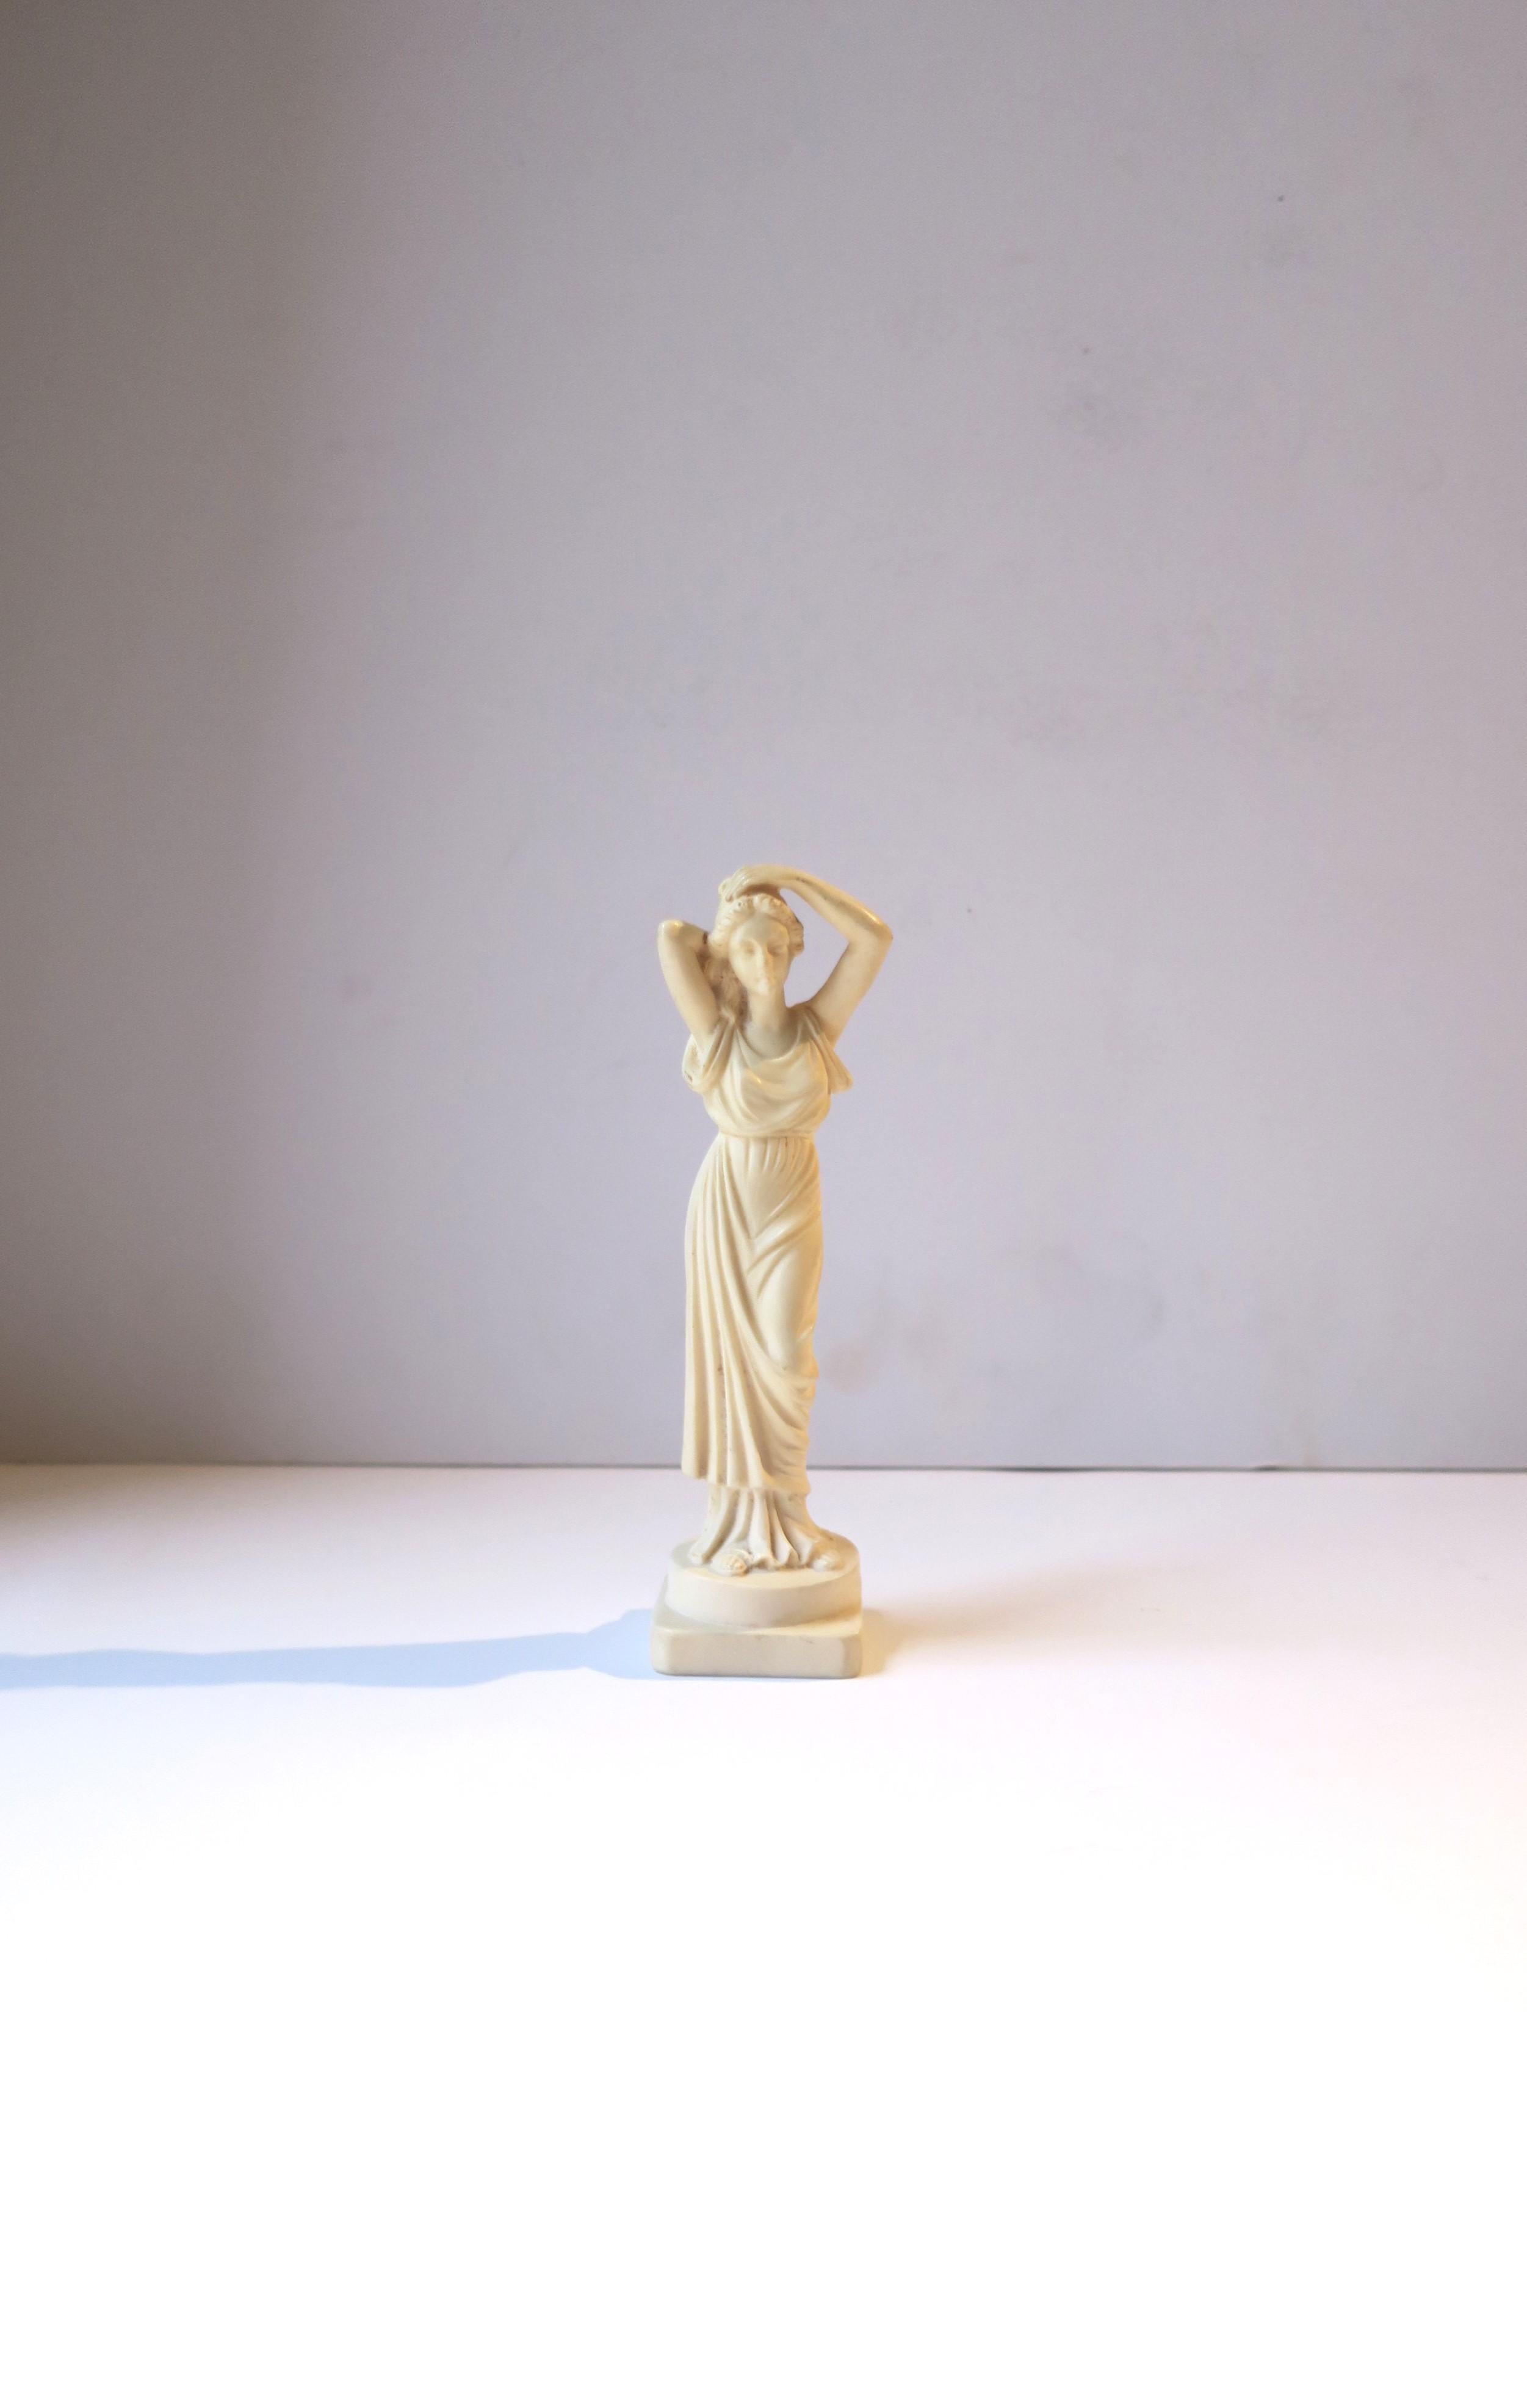 An Italian female resign sculpture statue in the Neoclassical design style, circa mid-20th century, 1950s, Italy. Sculpture statue is an off-white resin. A great decorative object. Marked 'Made in Italy' on bottom as shown in last image. Dimensions: